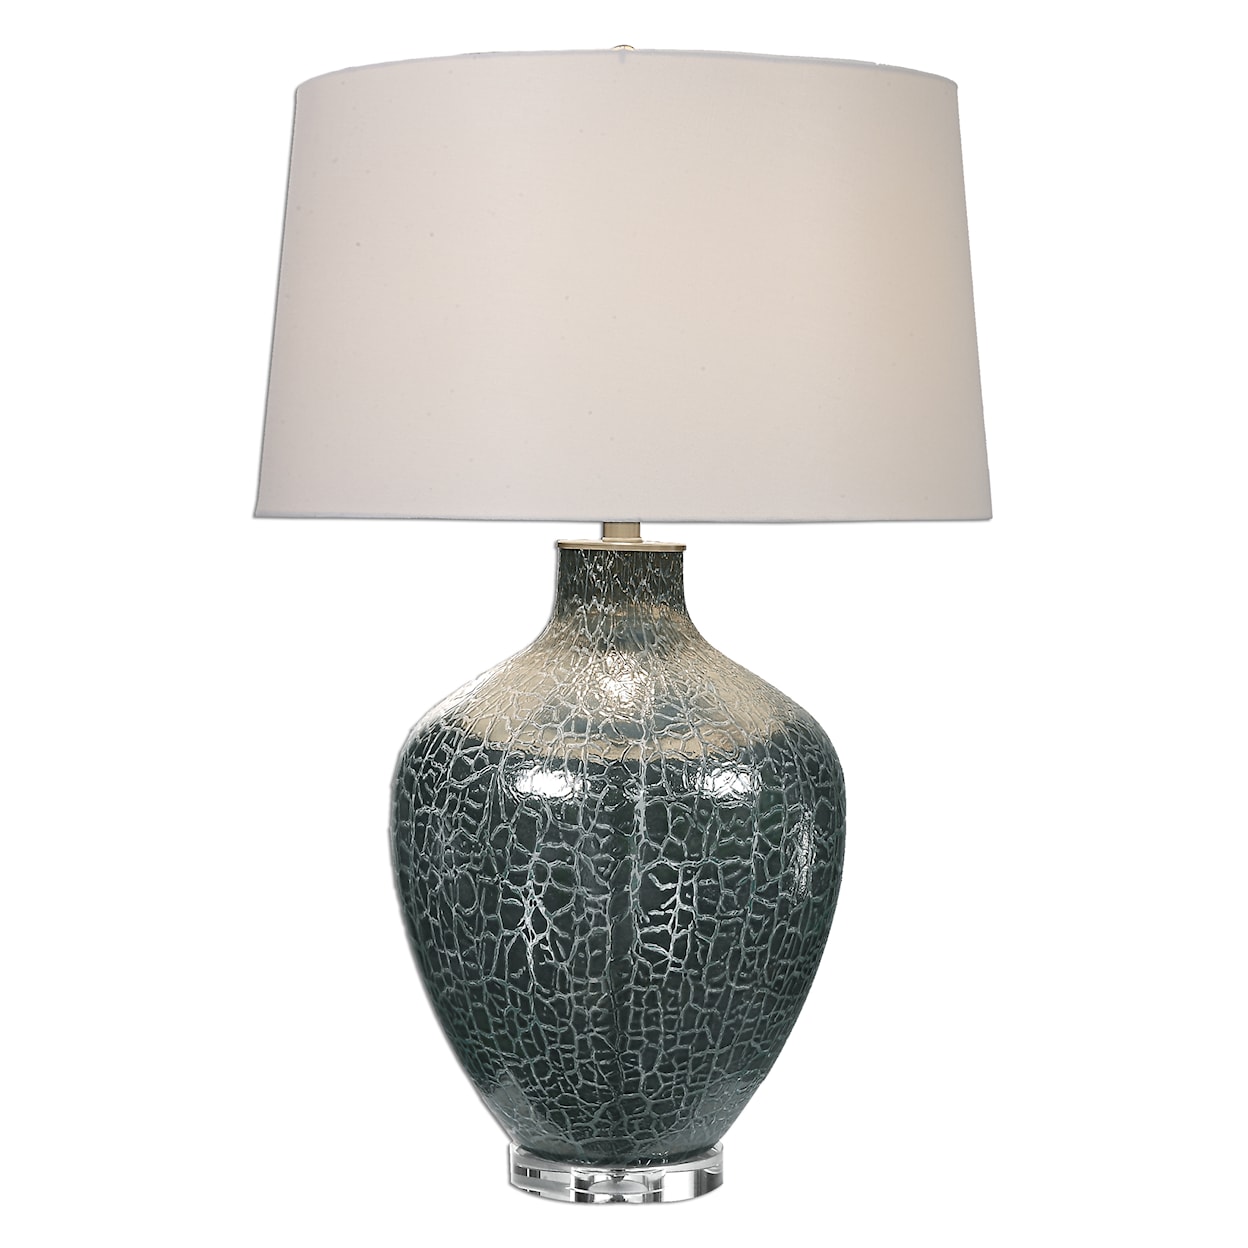 Uttermost Table Lamps Zumpano Crackled Gray Table Lamp